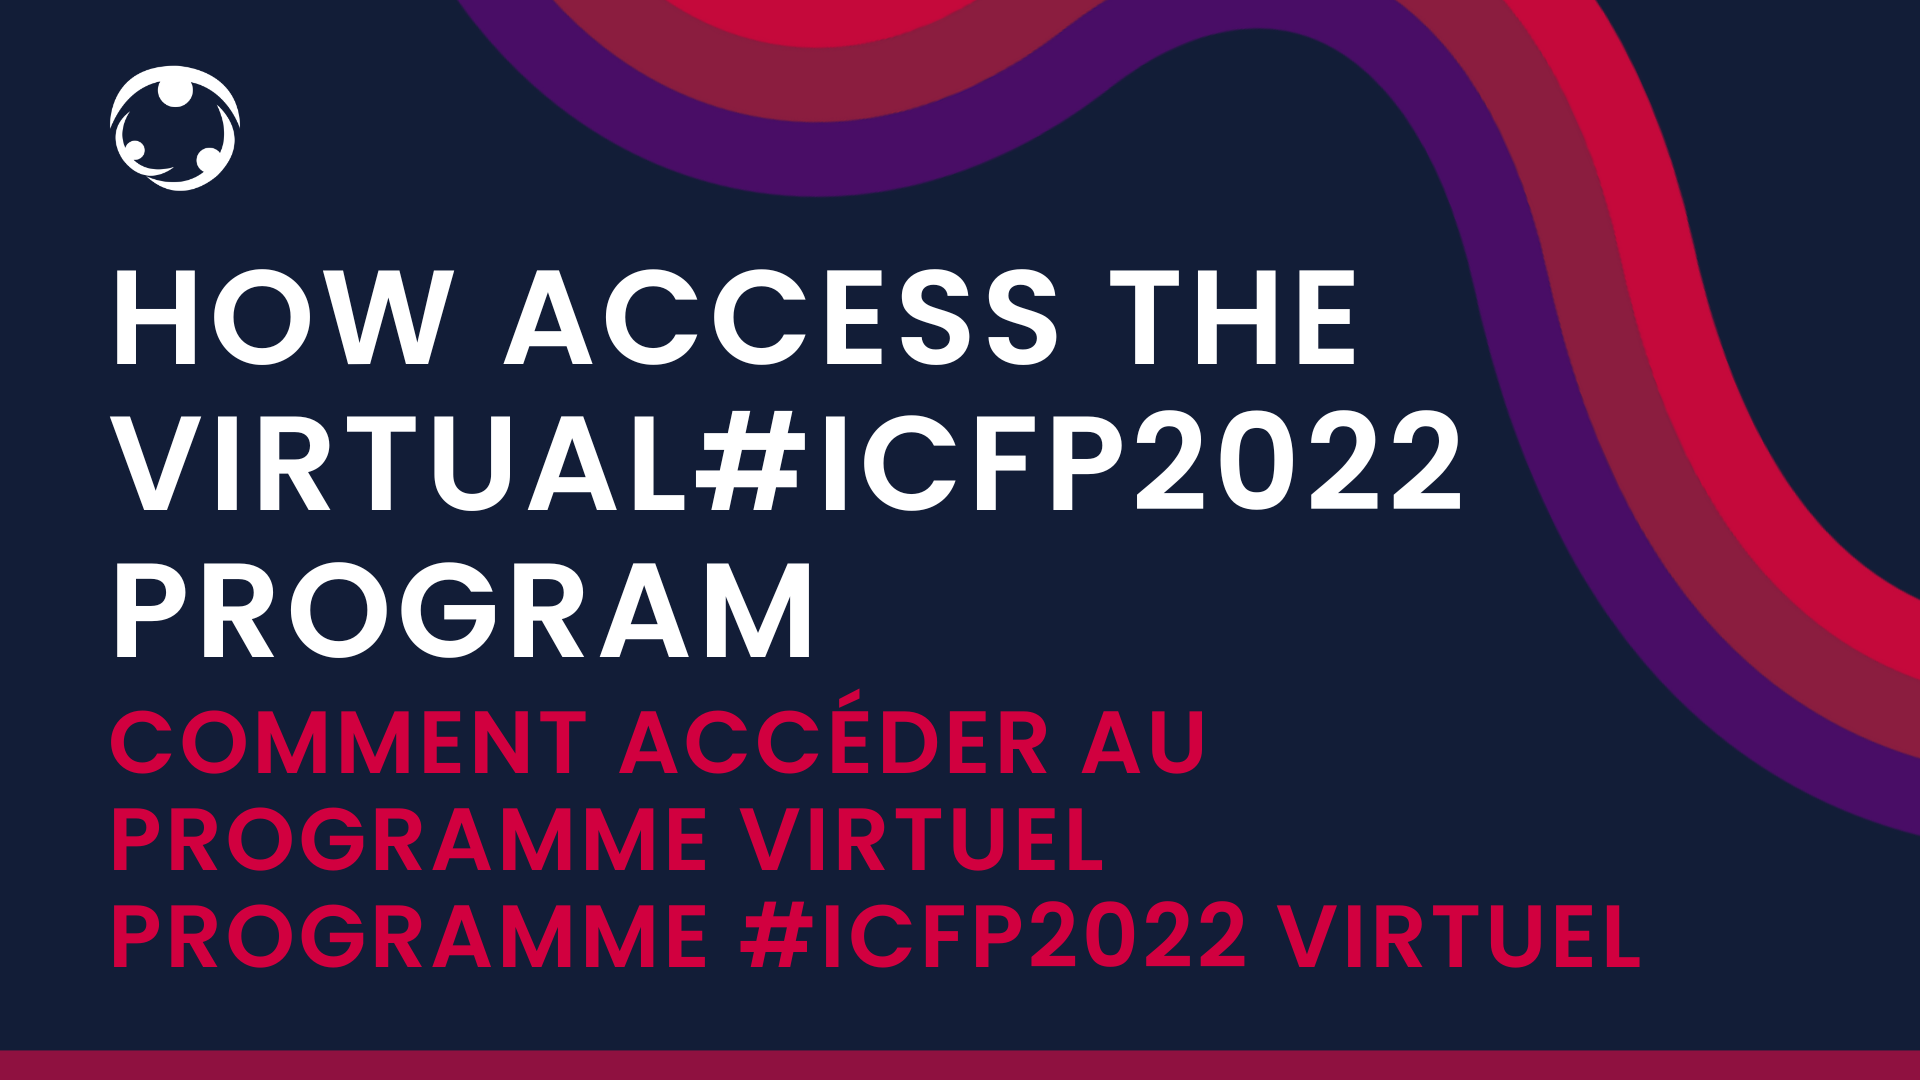 How to Access ICFP2022 Virtual Programming